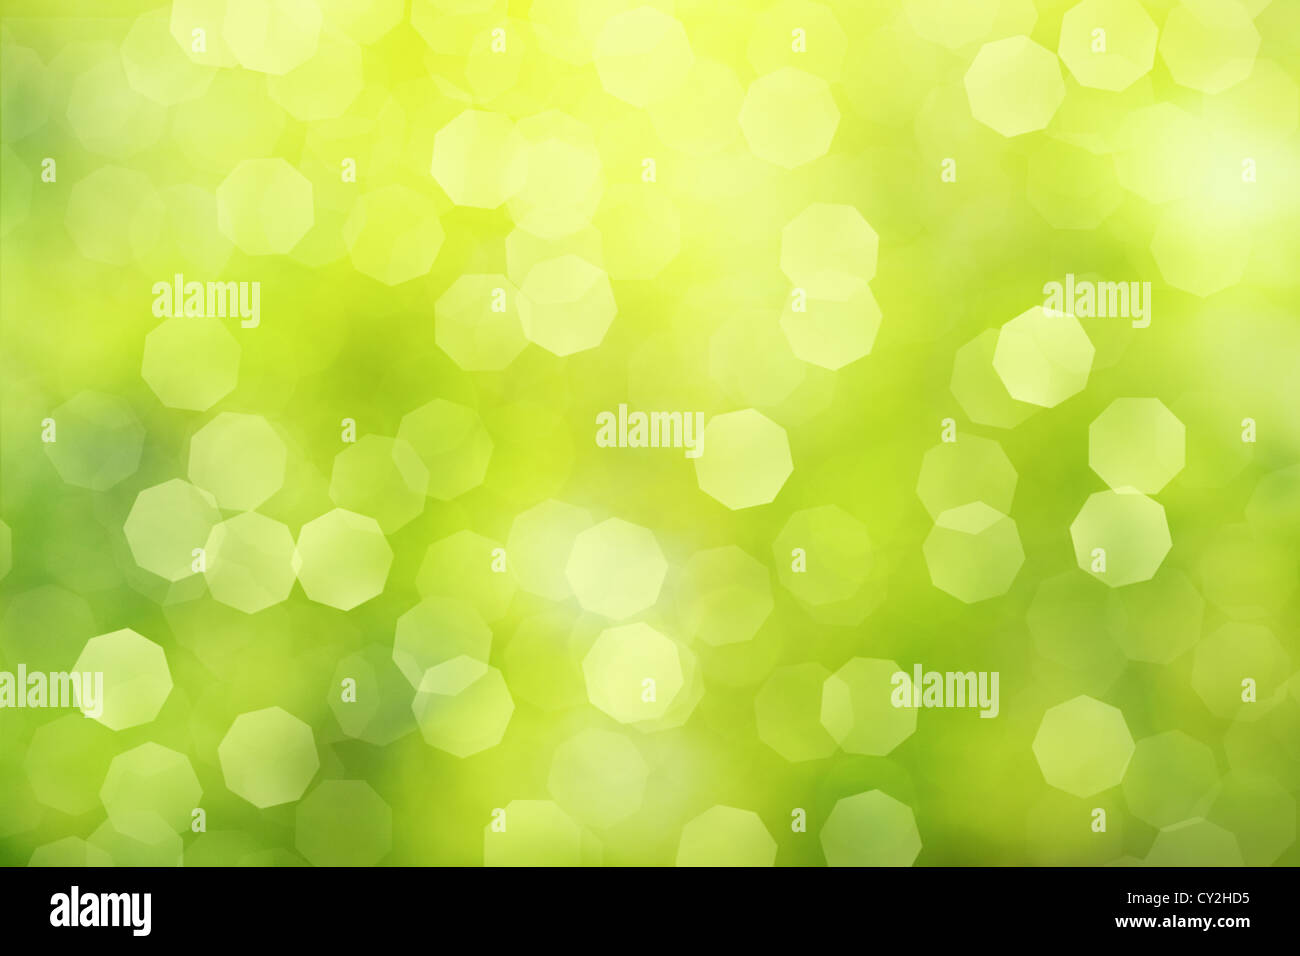 off focus green abstract background Stock Photo